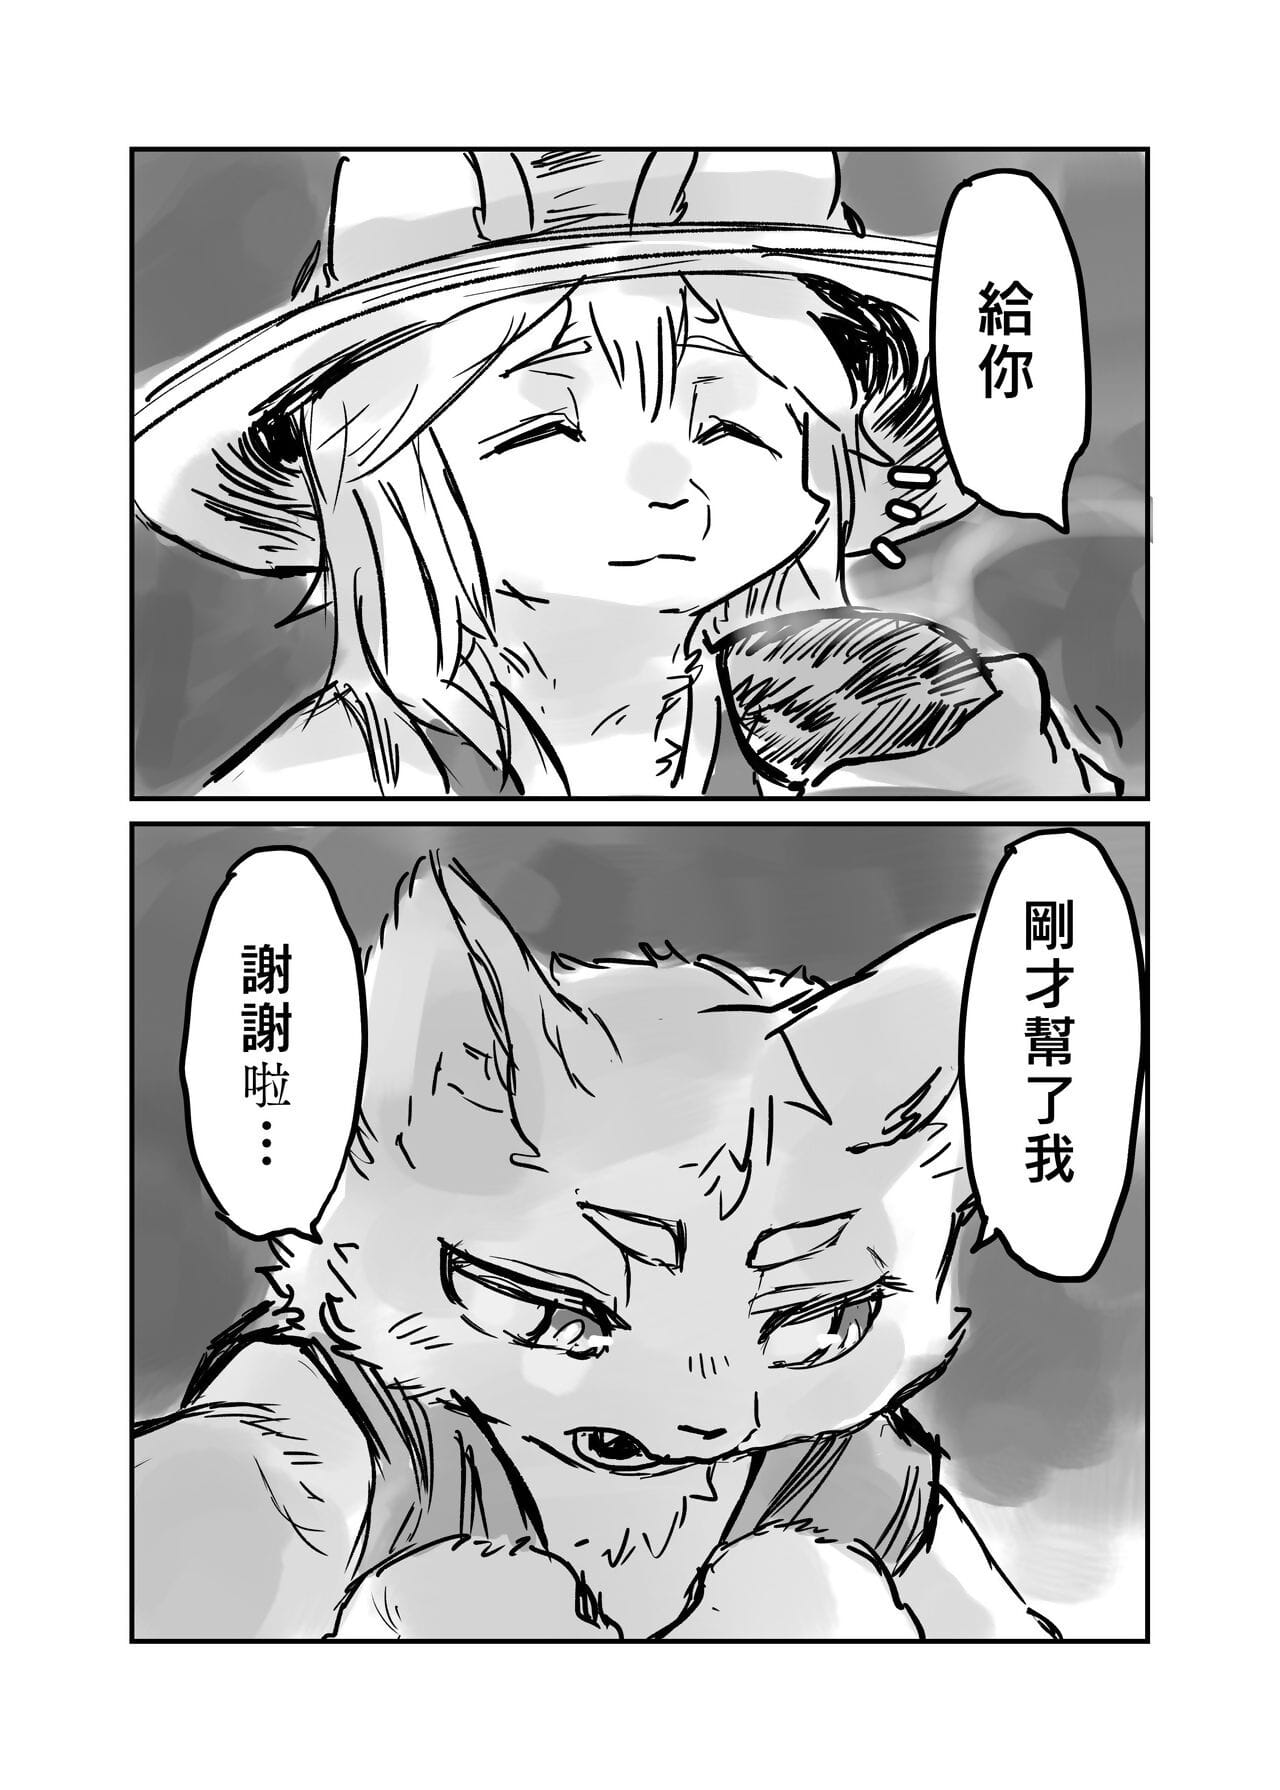 （the bezoeker 他乡之人 by：鬼流 page 1